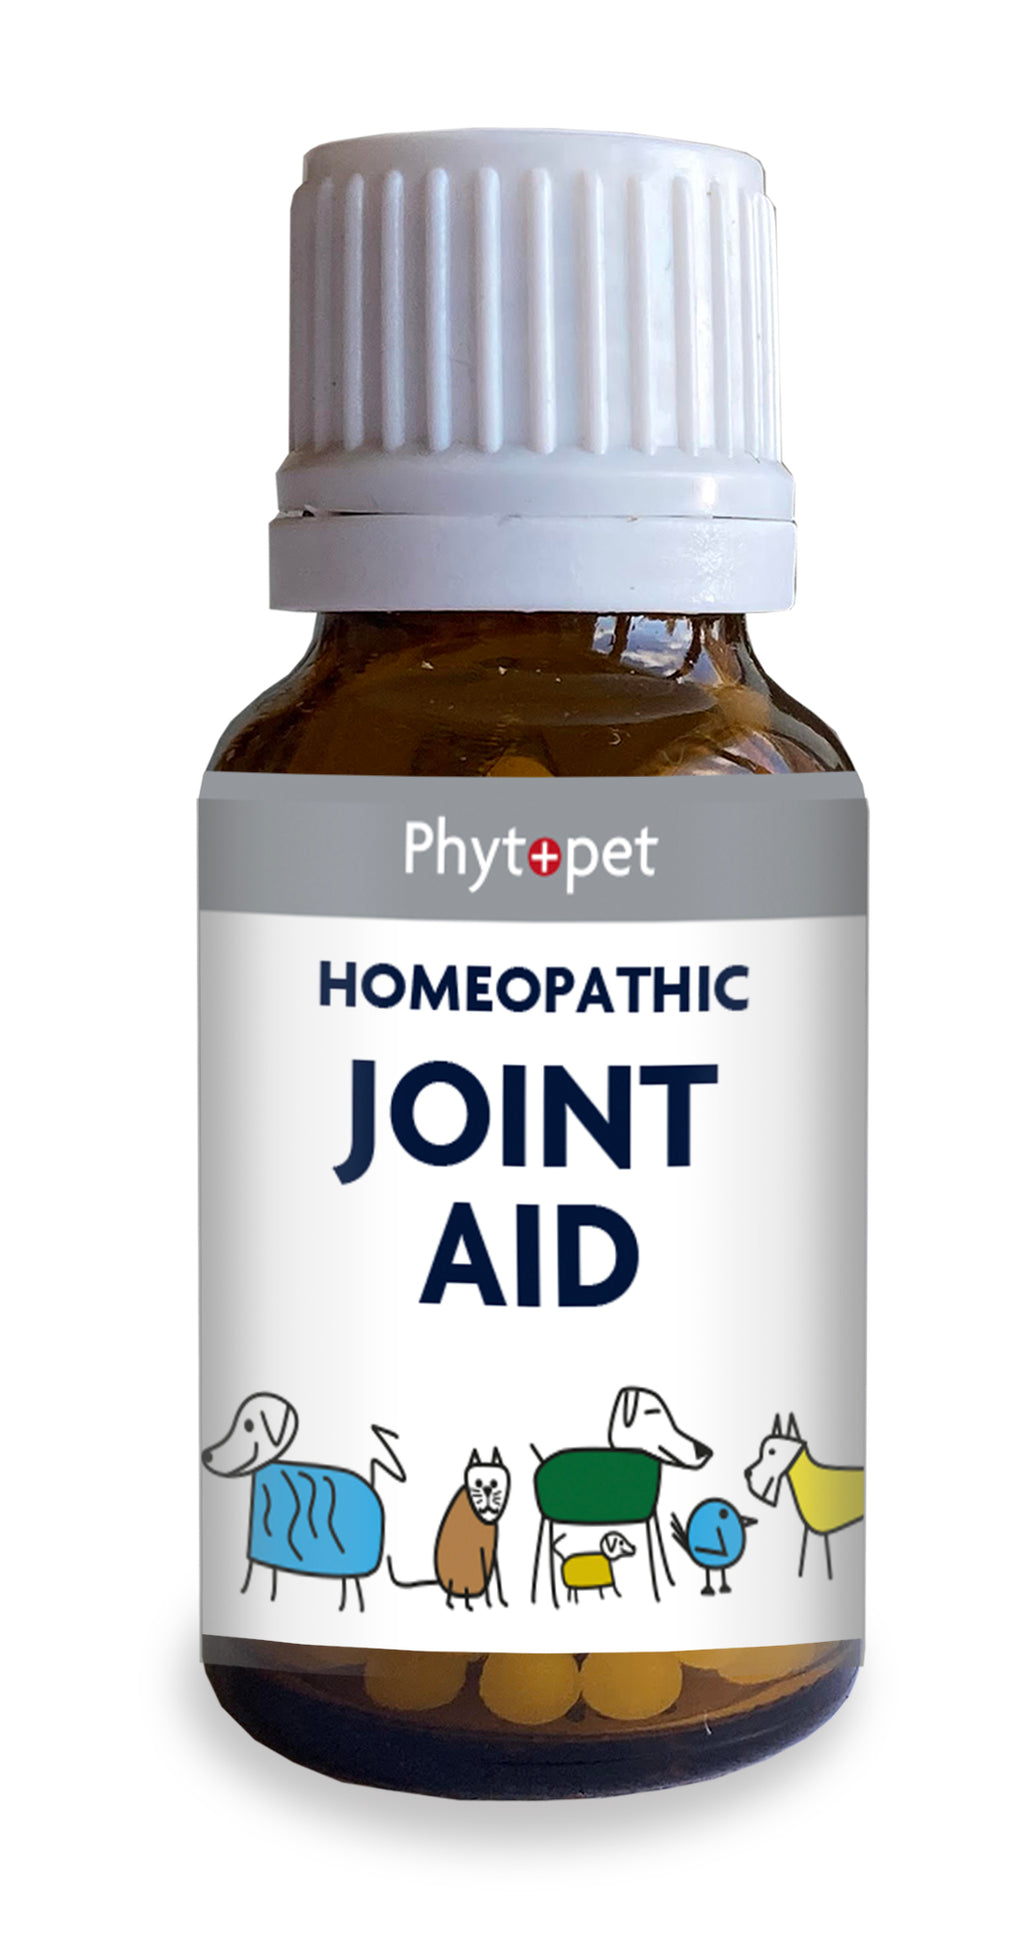 Homeopathic Joint Aid